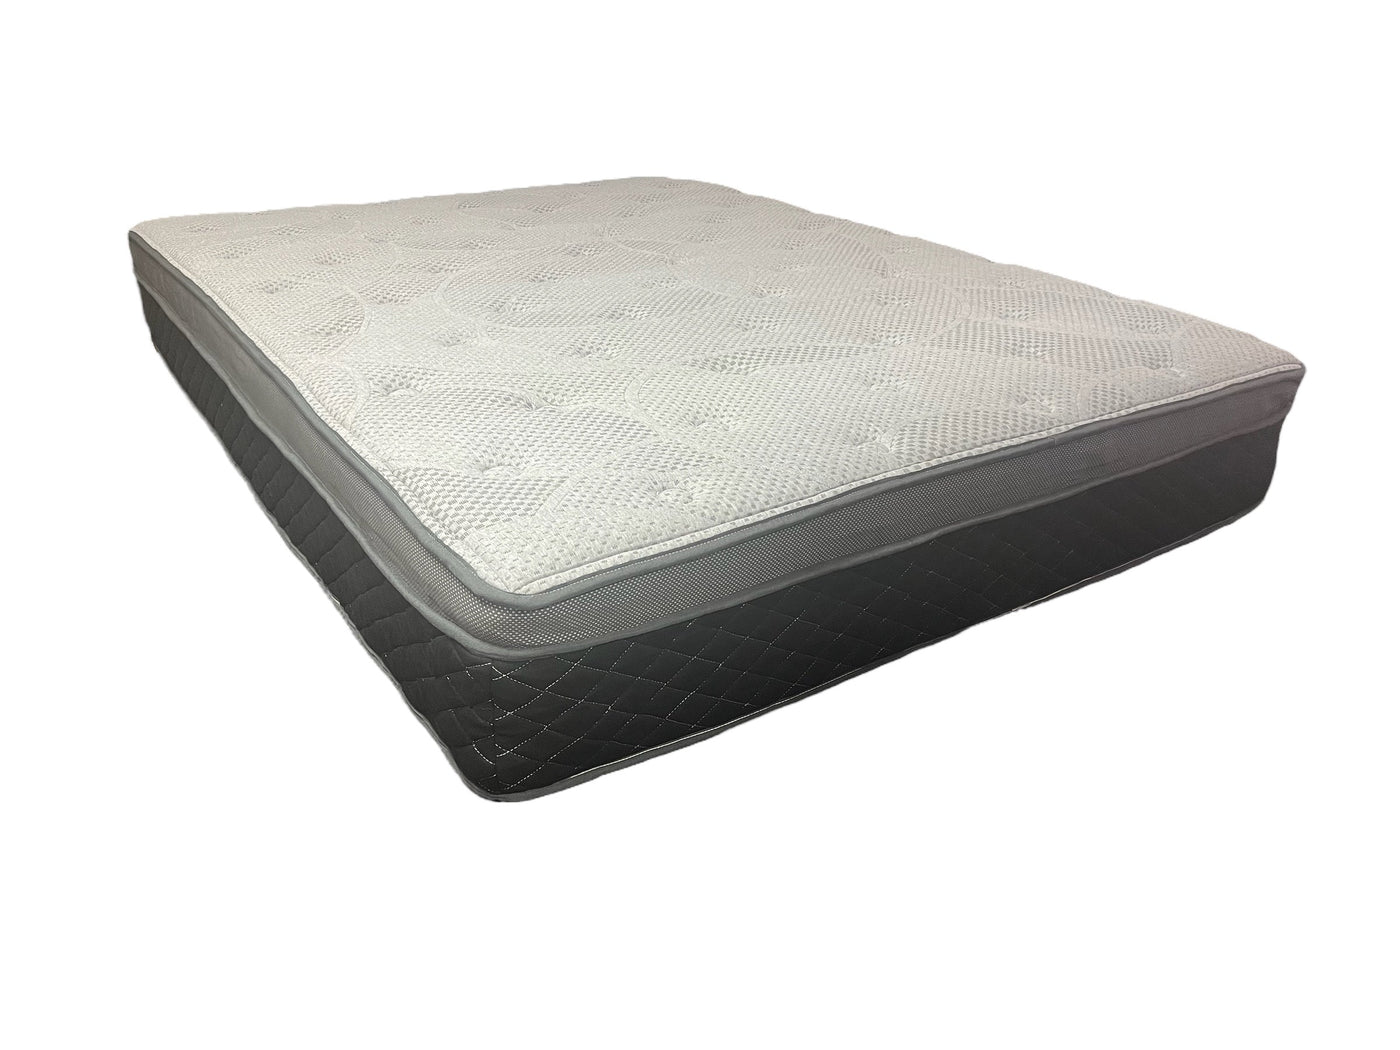 CLEARANCE Bed Tech 12" Hybrid Plush Queen Mattress Only with Adjustable Base WHOLESALE PRICE